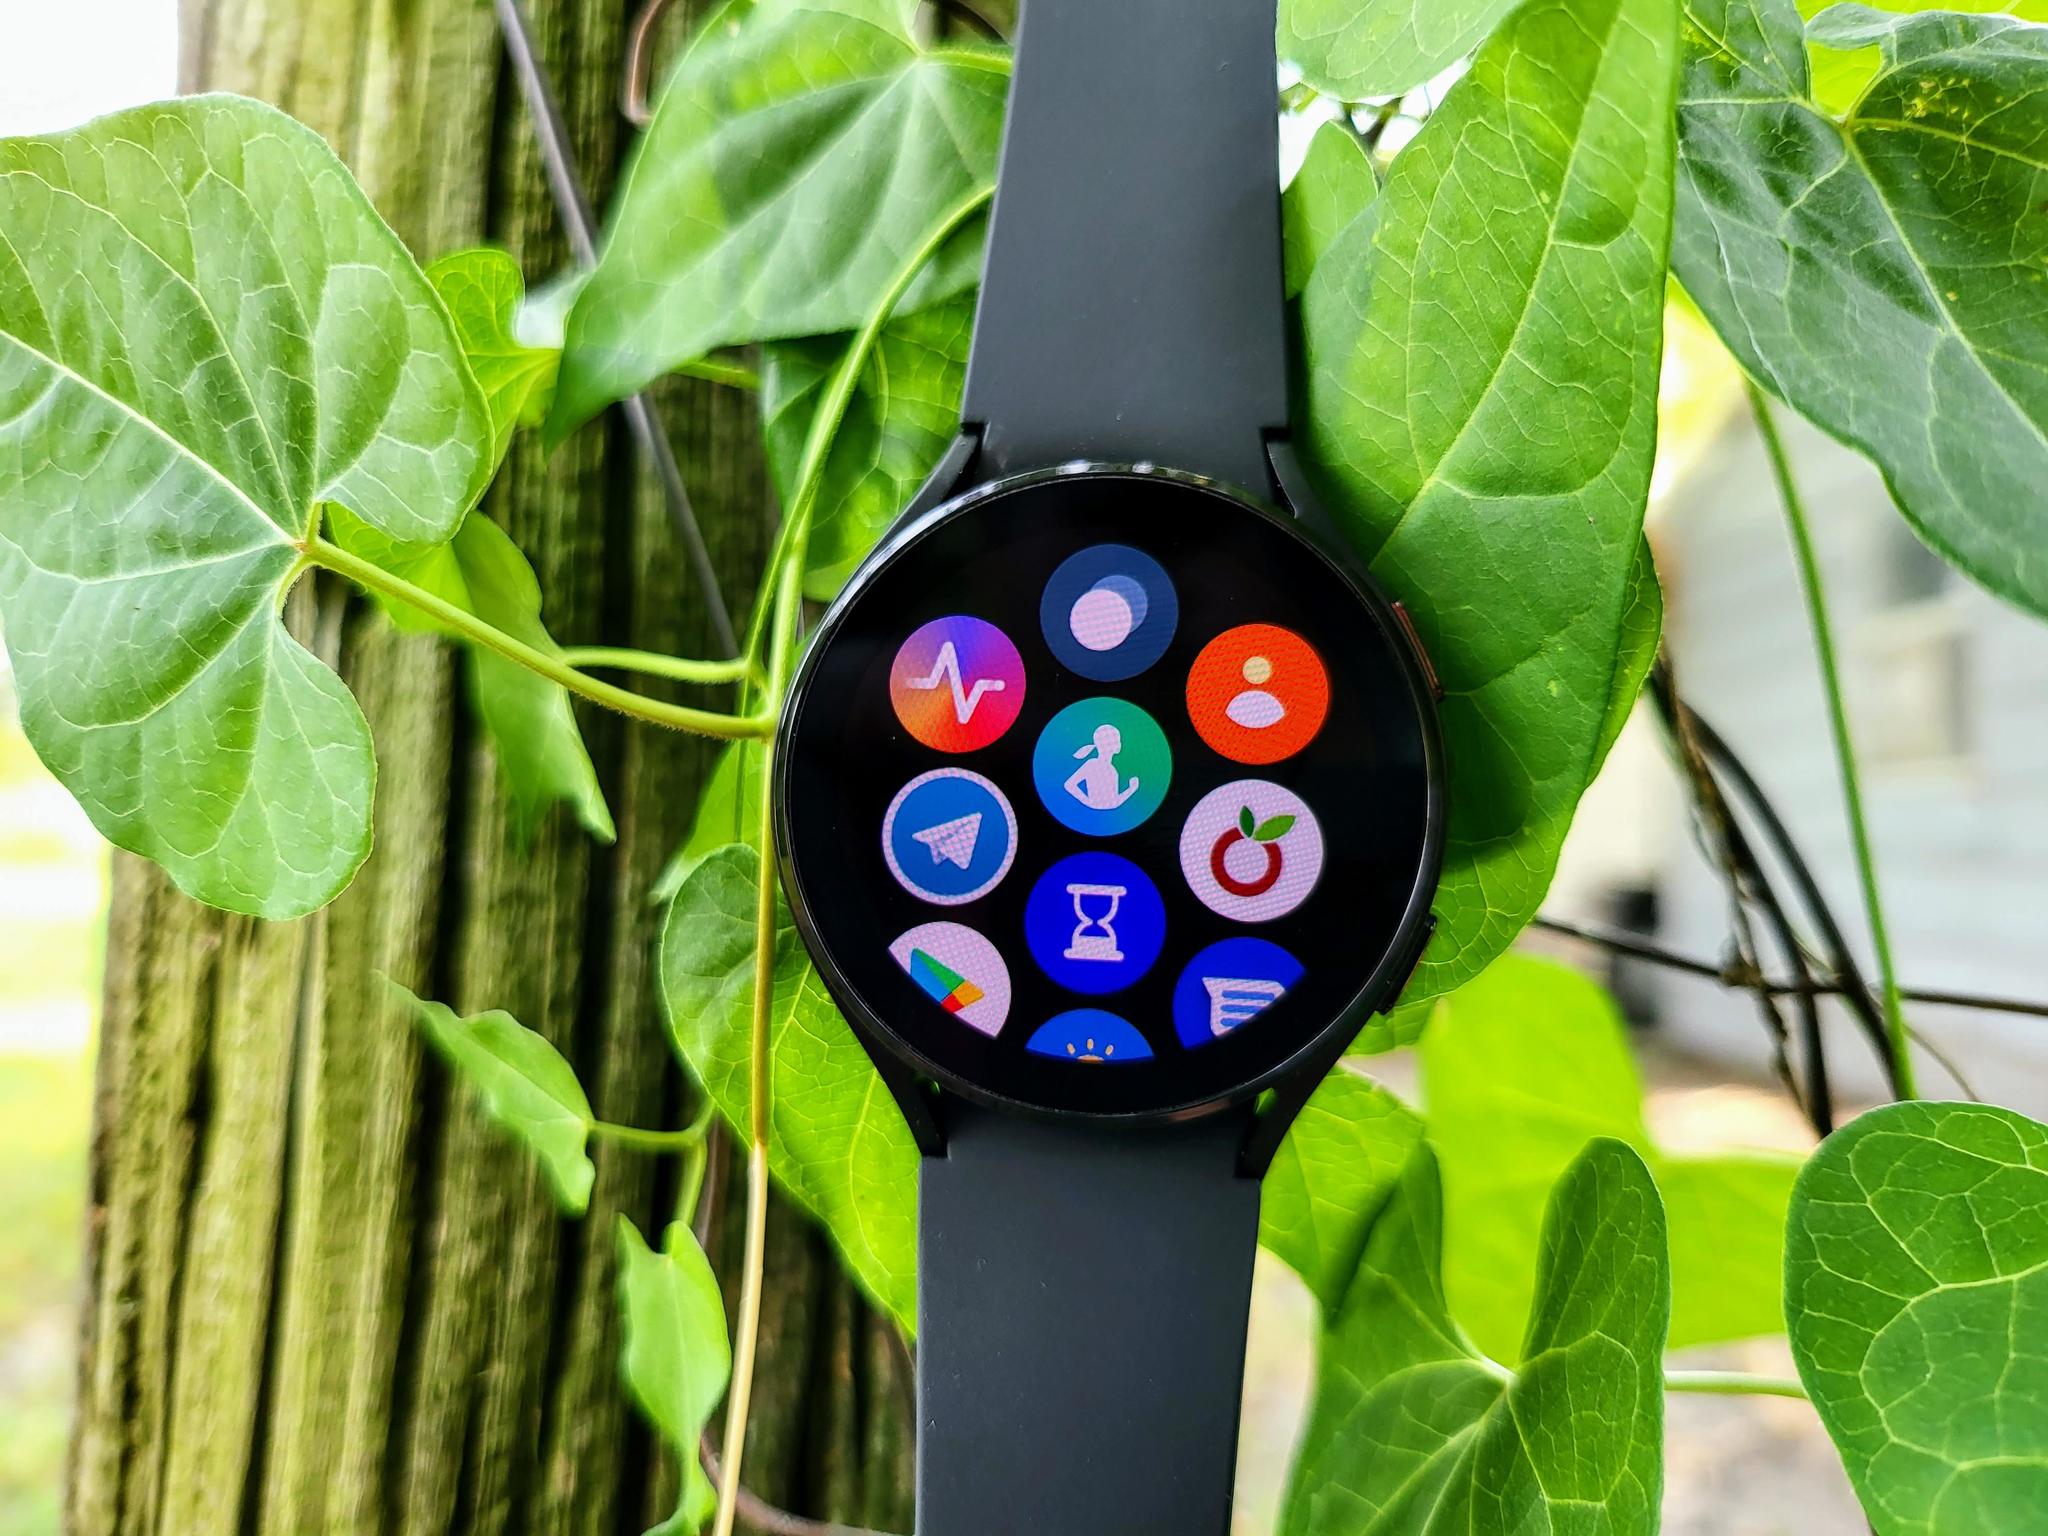 New Amazfit GTS 3 GTS3 GTS-3 Smartwatch Alexa Built in 1.75-inch AMOLED  Display 12-day Battery Life Smart watch for Andriod